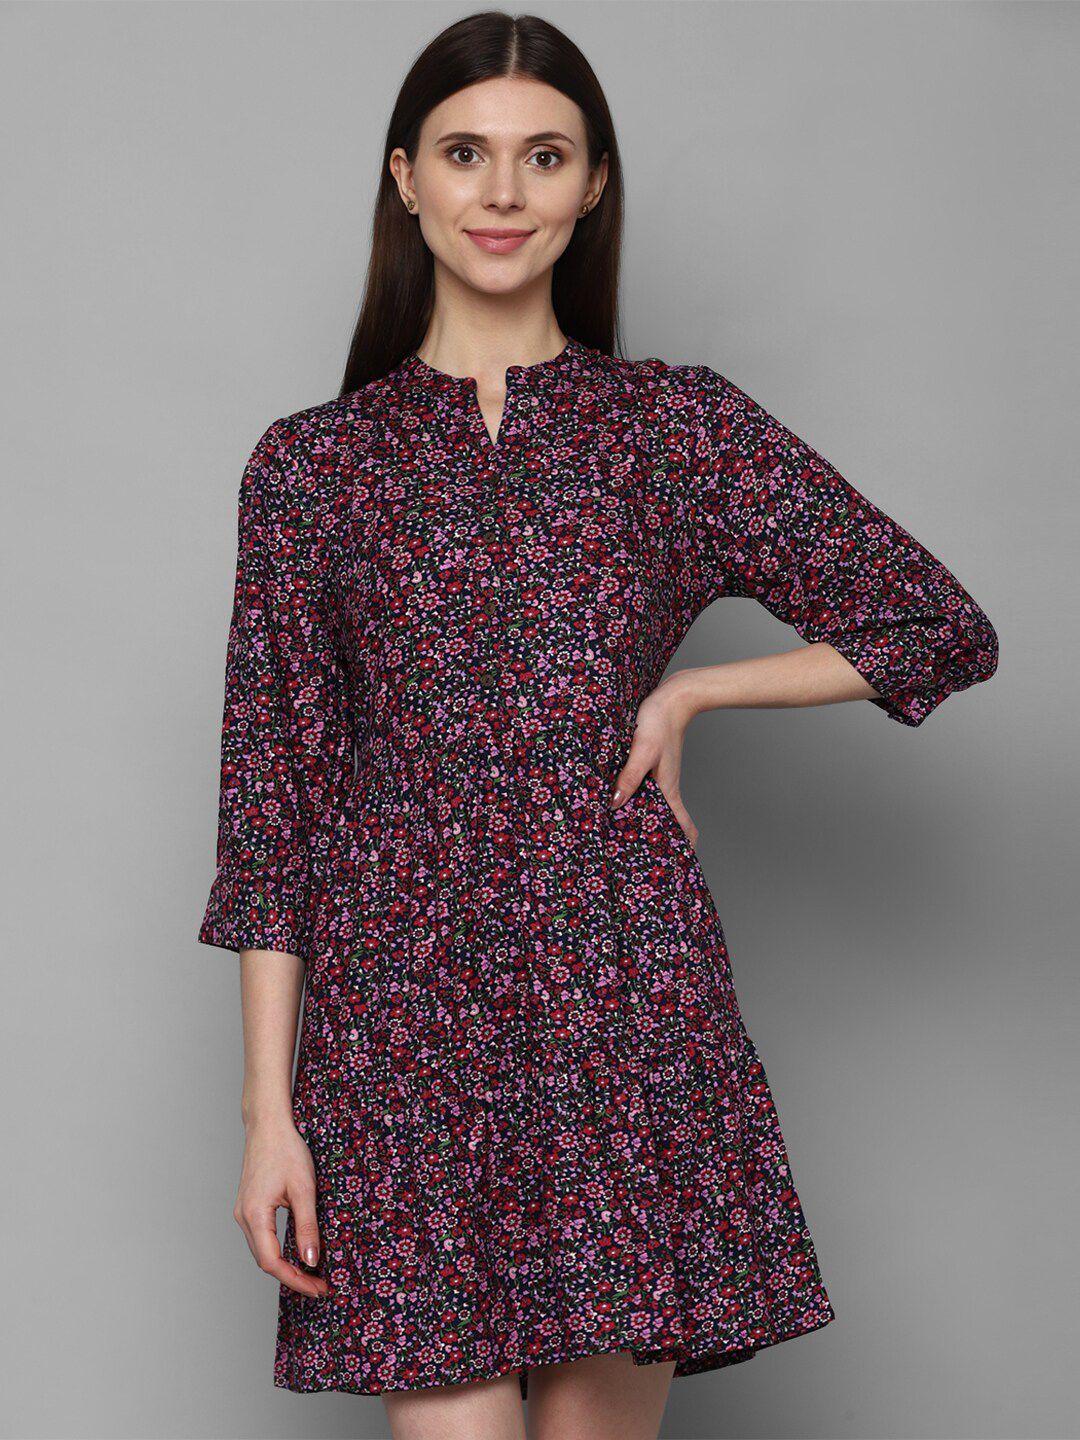 allen solly woman purple fit and flare floral dress